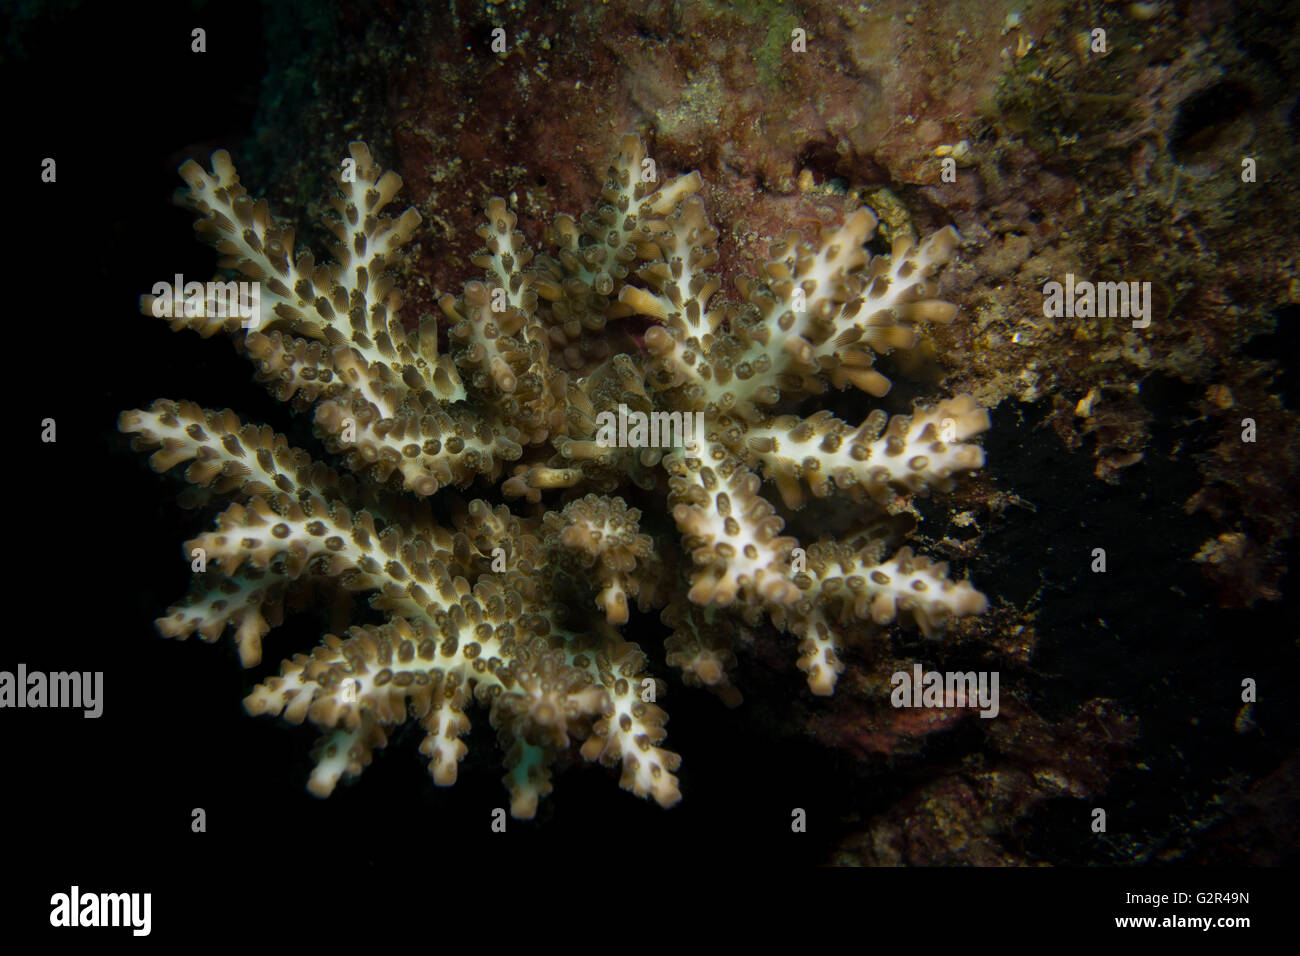 Stony coral, Acropora sp., from the coral reefs on Brunei. Stock Photo